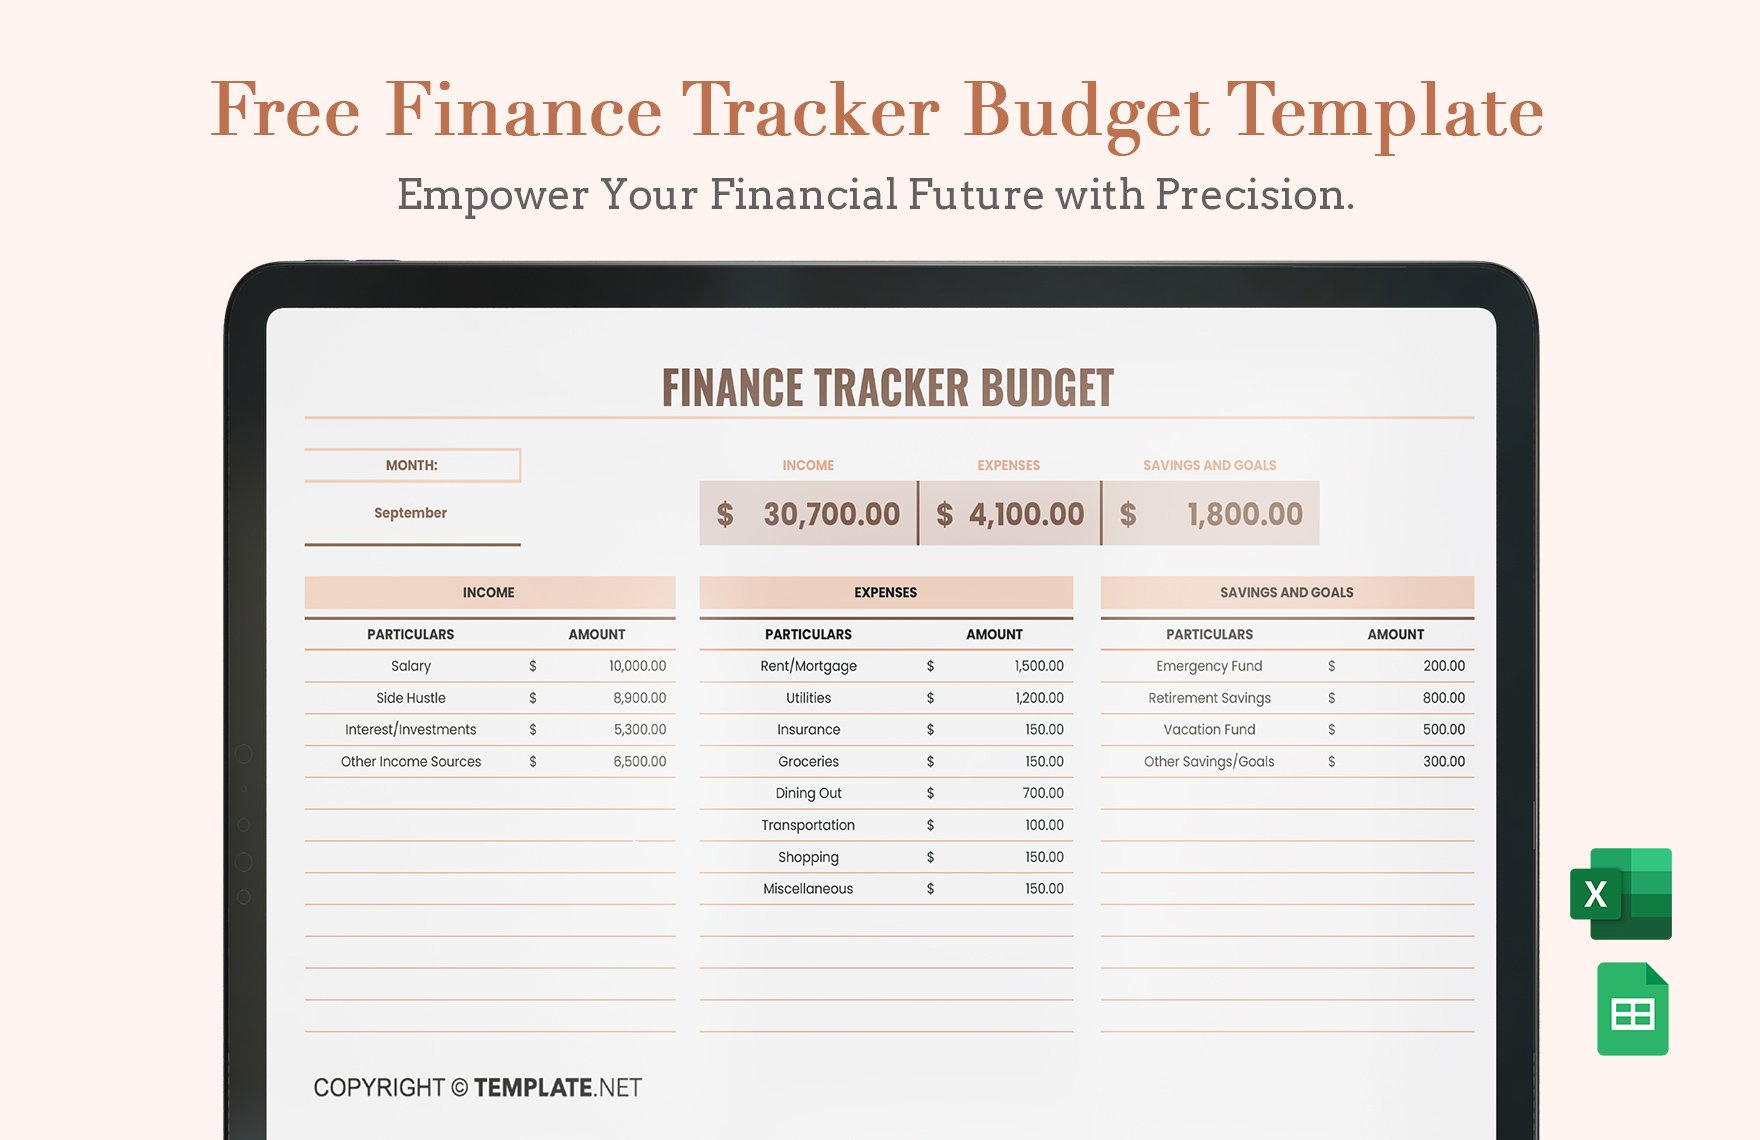 Free Finance Tracker Budget Template in Excel, Google Sheets